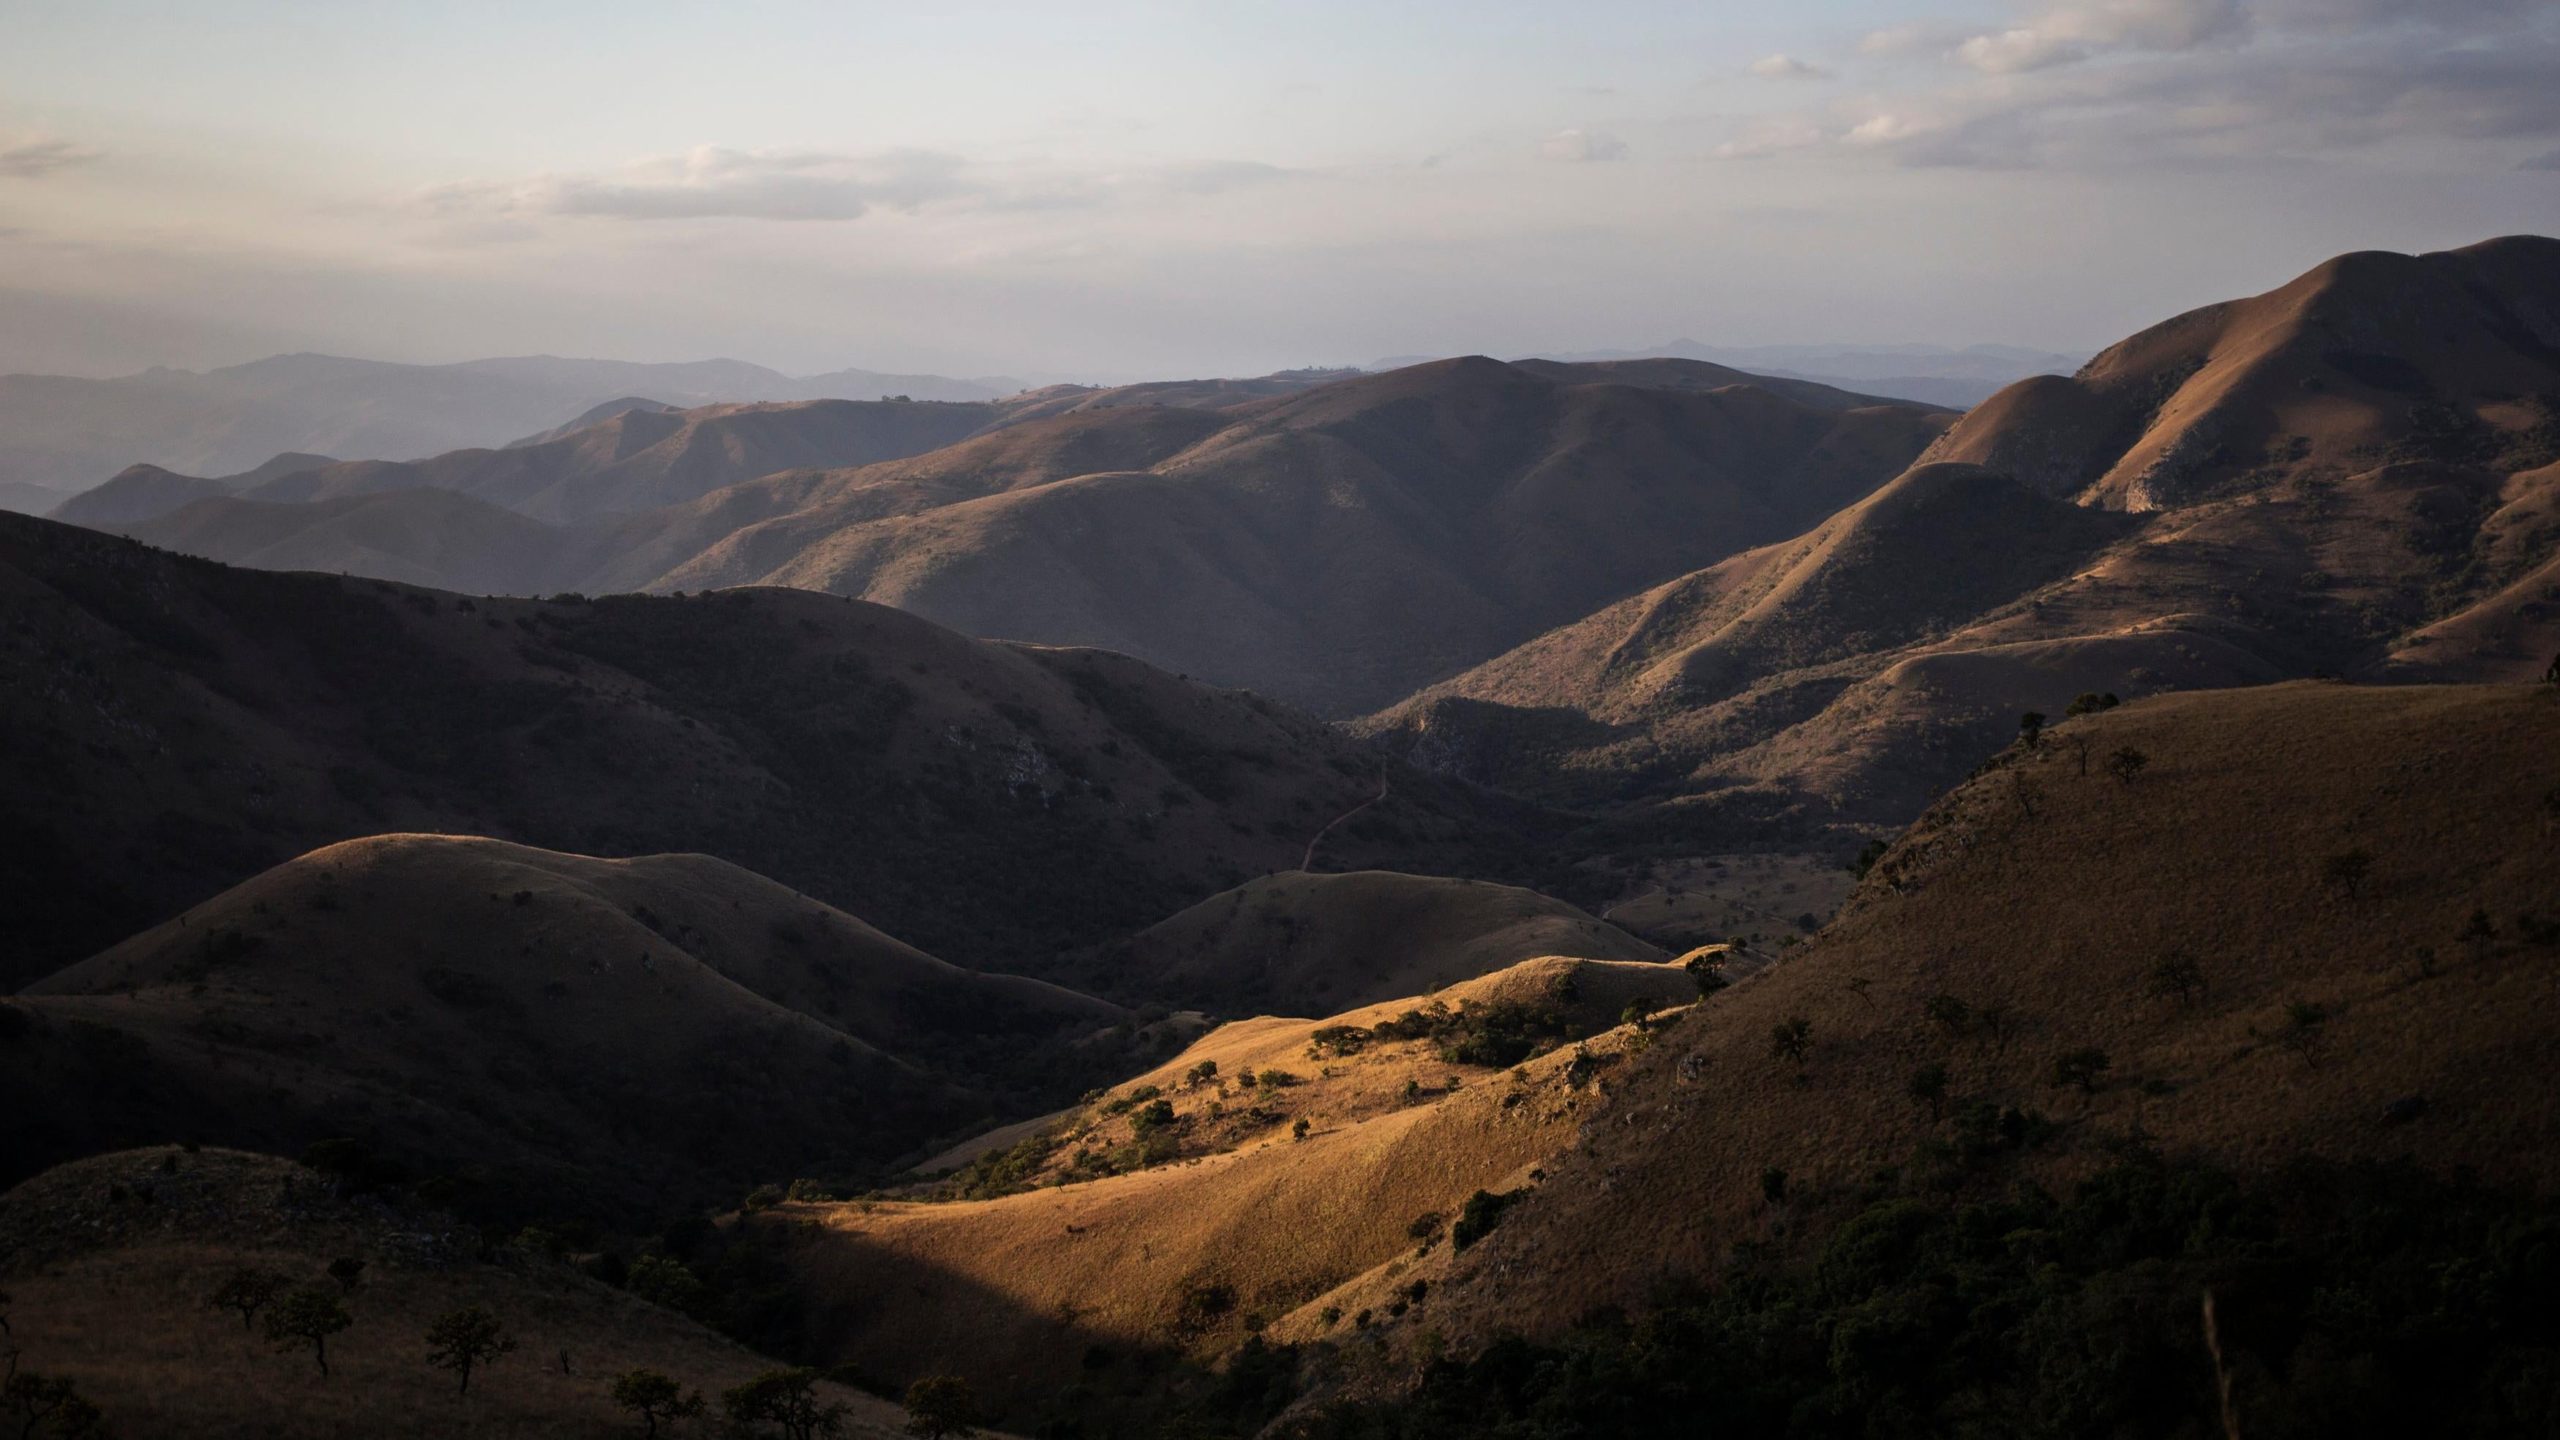 The Makhonjwa Mountains as seen from the Eureka Viewpoint on the geotrail near Barberton, Mpumalanga. (Photo: Wikus De Wet/AFP, Getty Images)